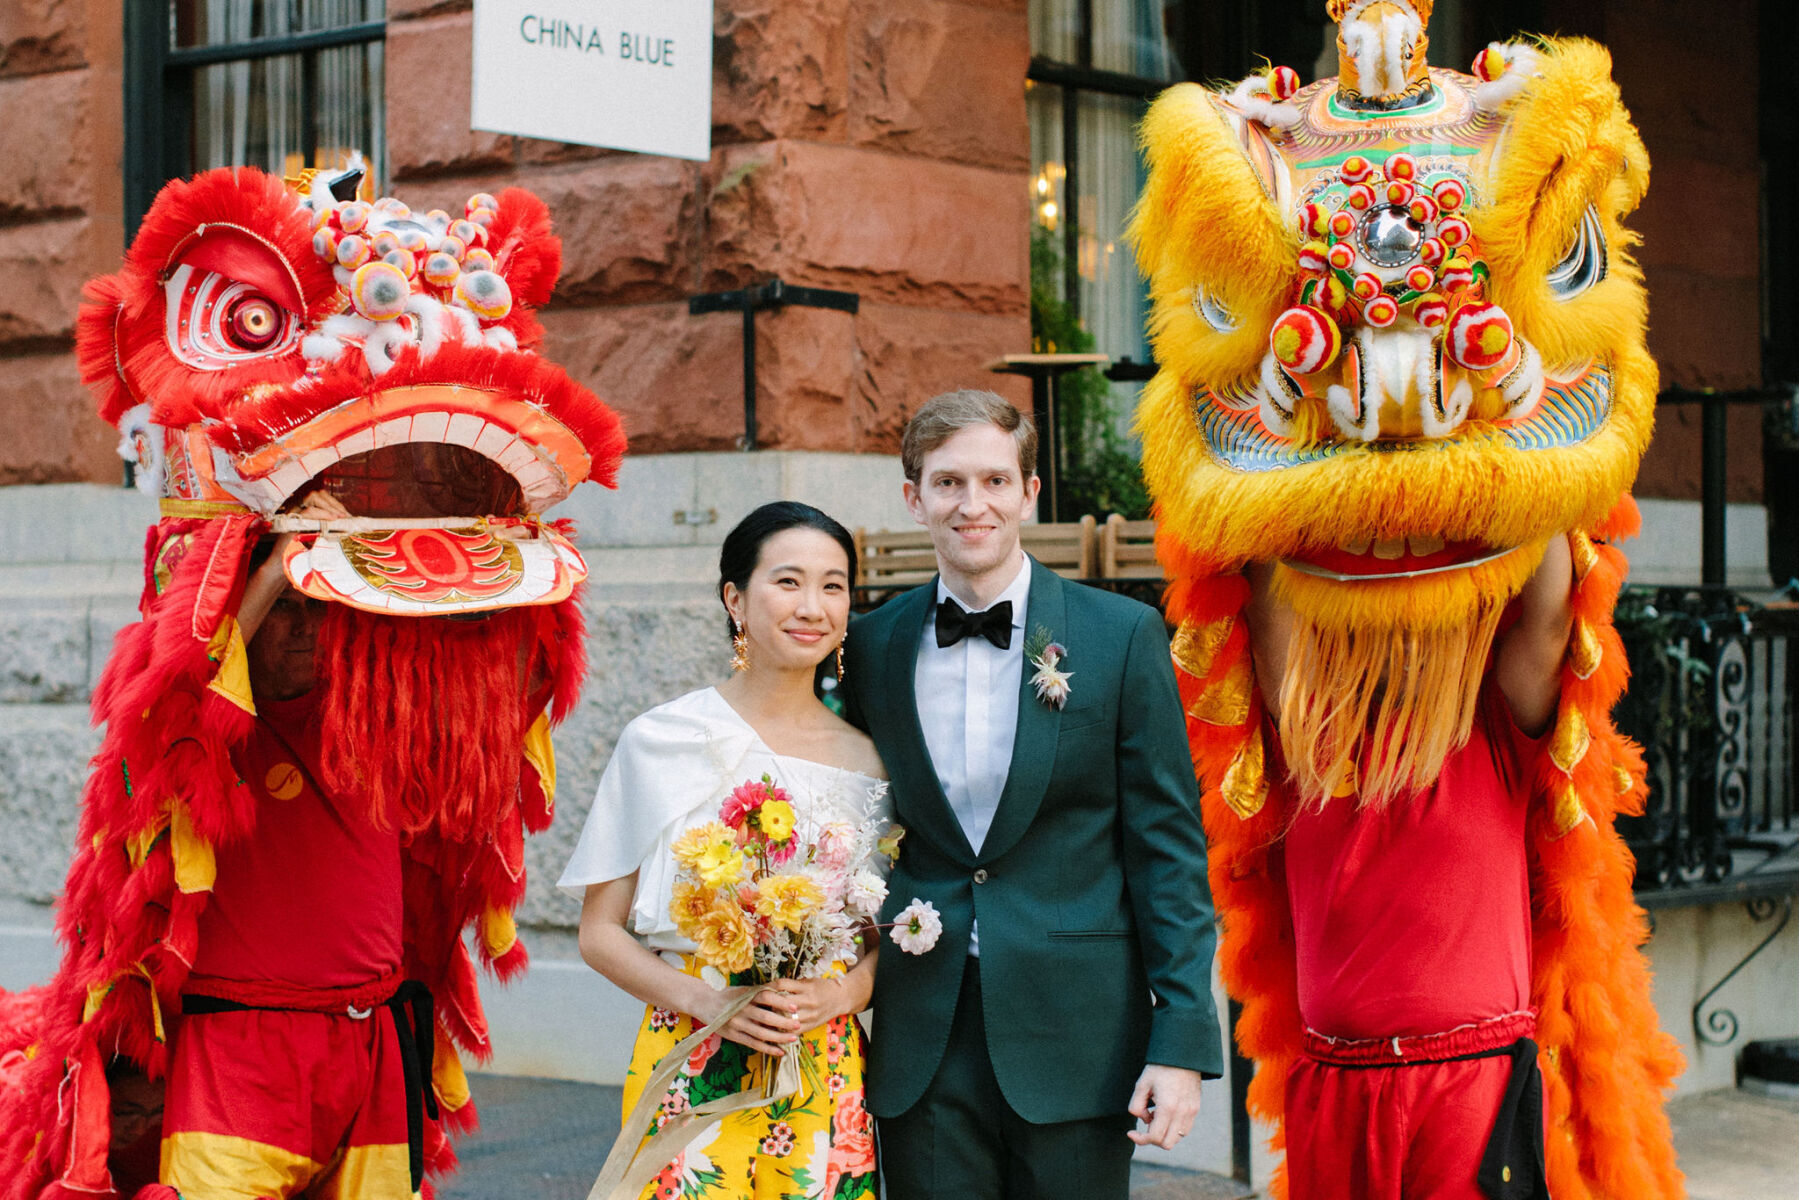 Wedding Traditions: A bride and groom with a gold and red lion at their wedding ceremony.